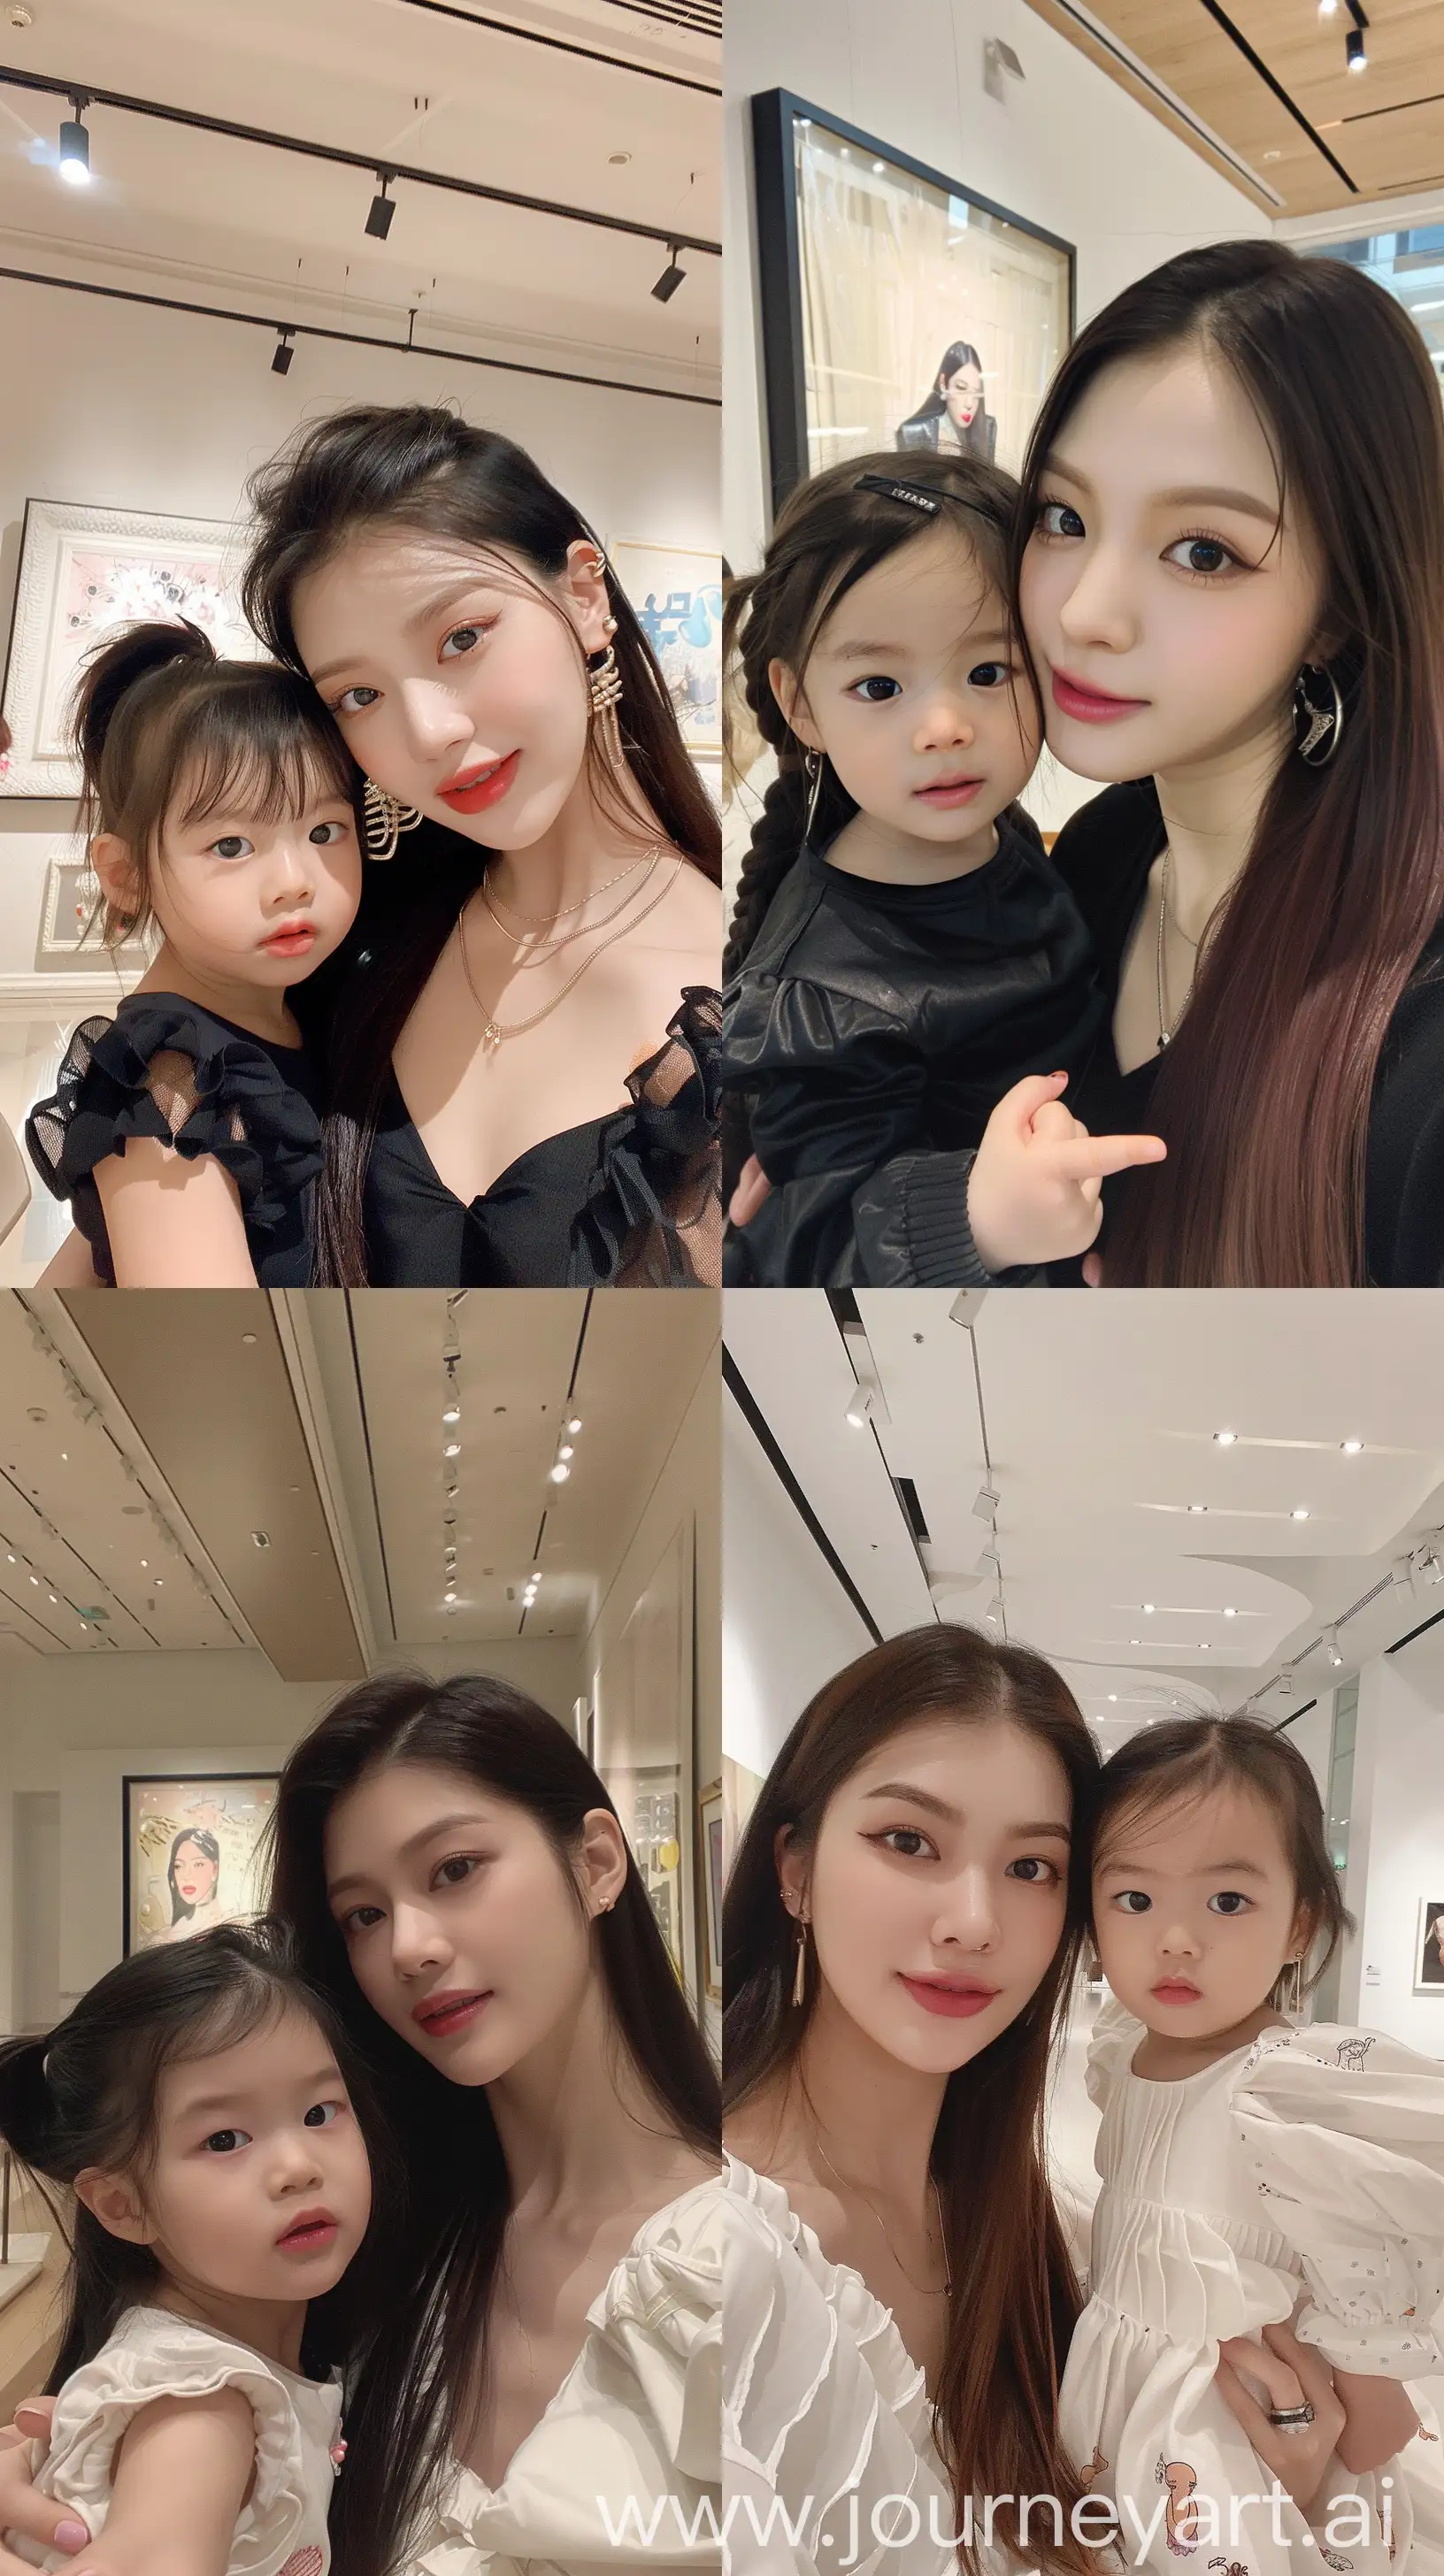 blackpink's jennie selfie with 2 years old  girl, facial feature look a like blackpink's jennie, aestethic selfie, inside modern art gallery, night times, aestethic make up,hotly elegant young mom --ar 9:16 